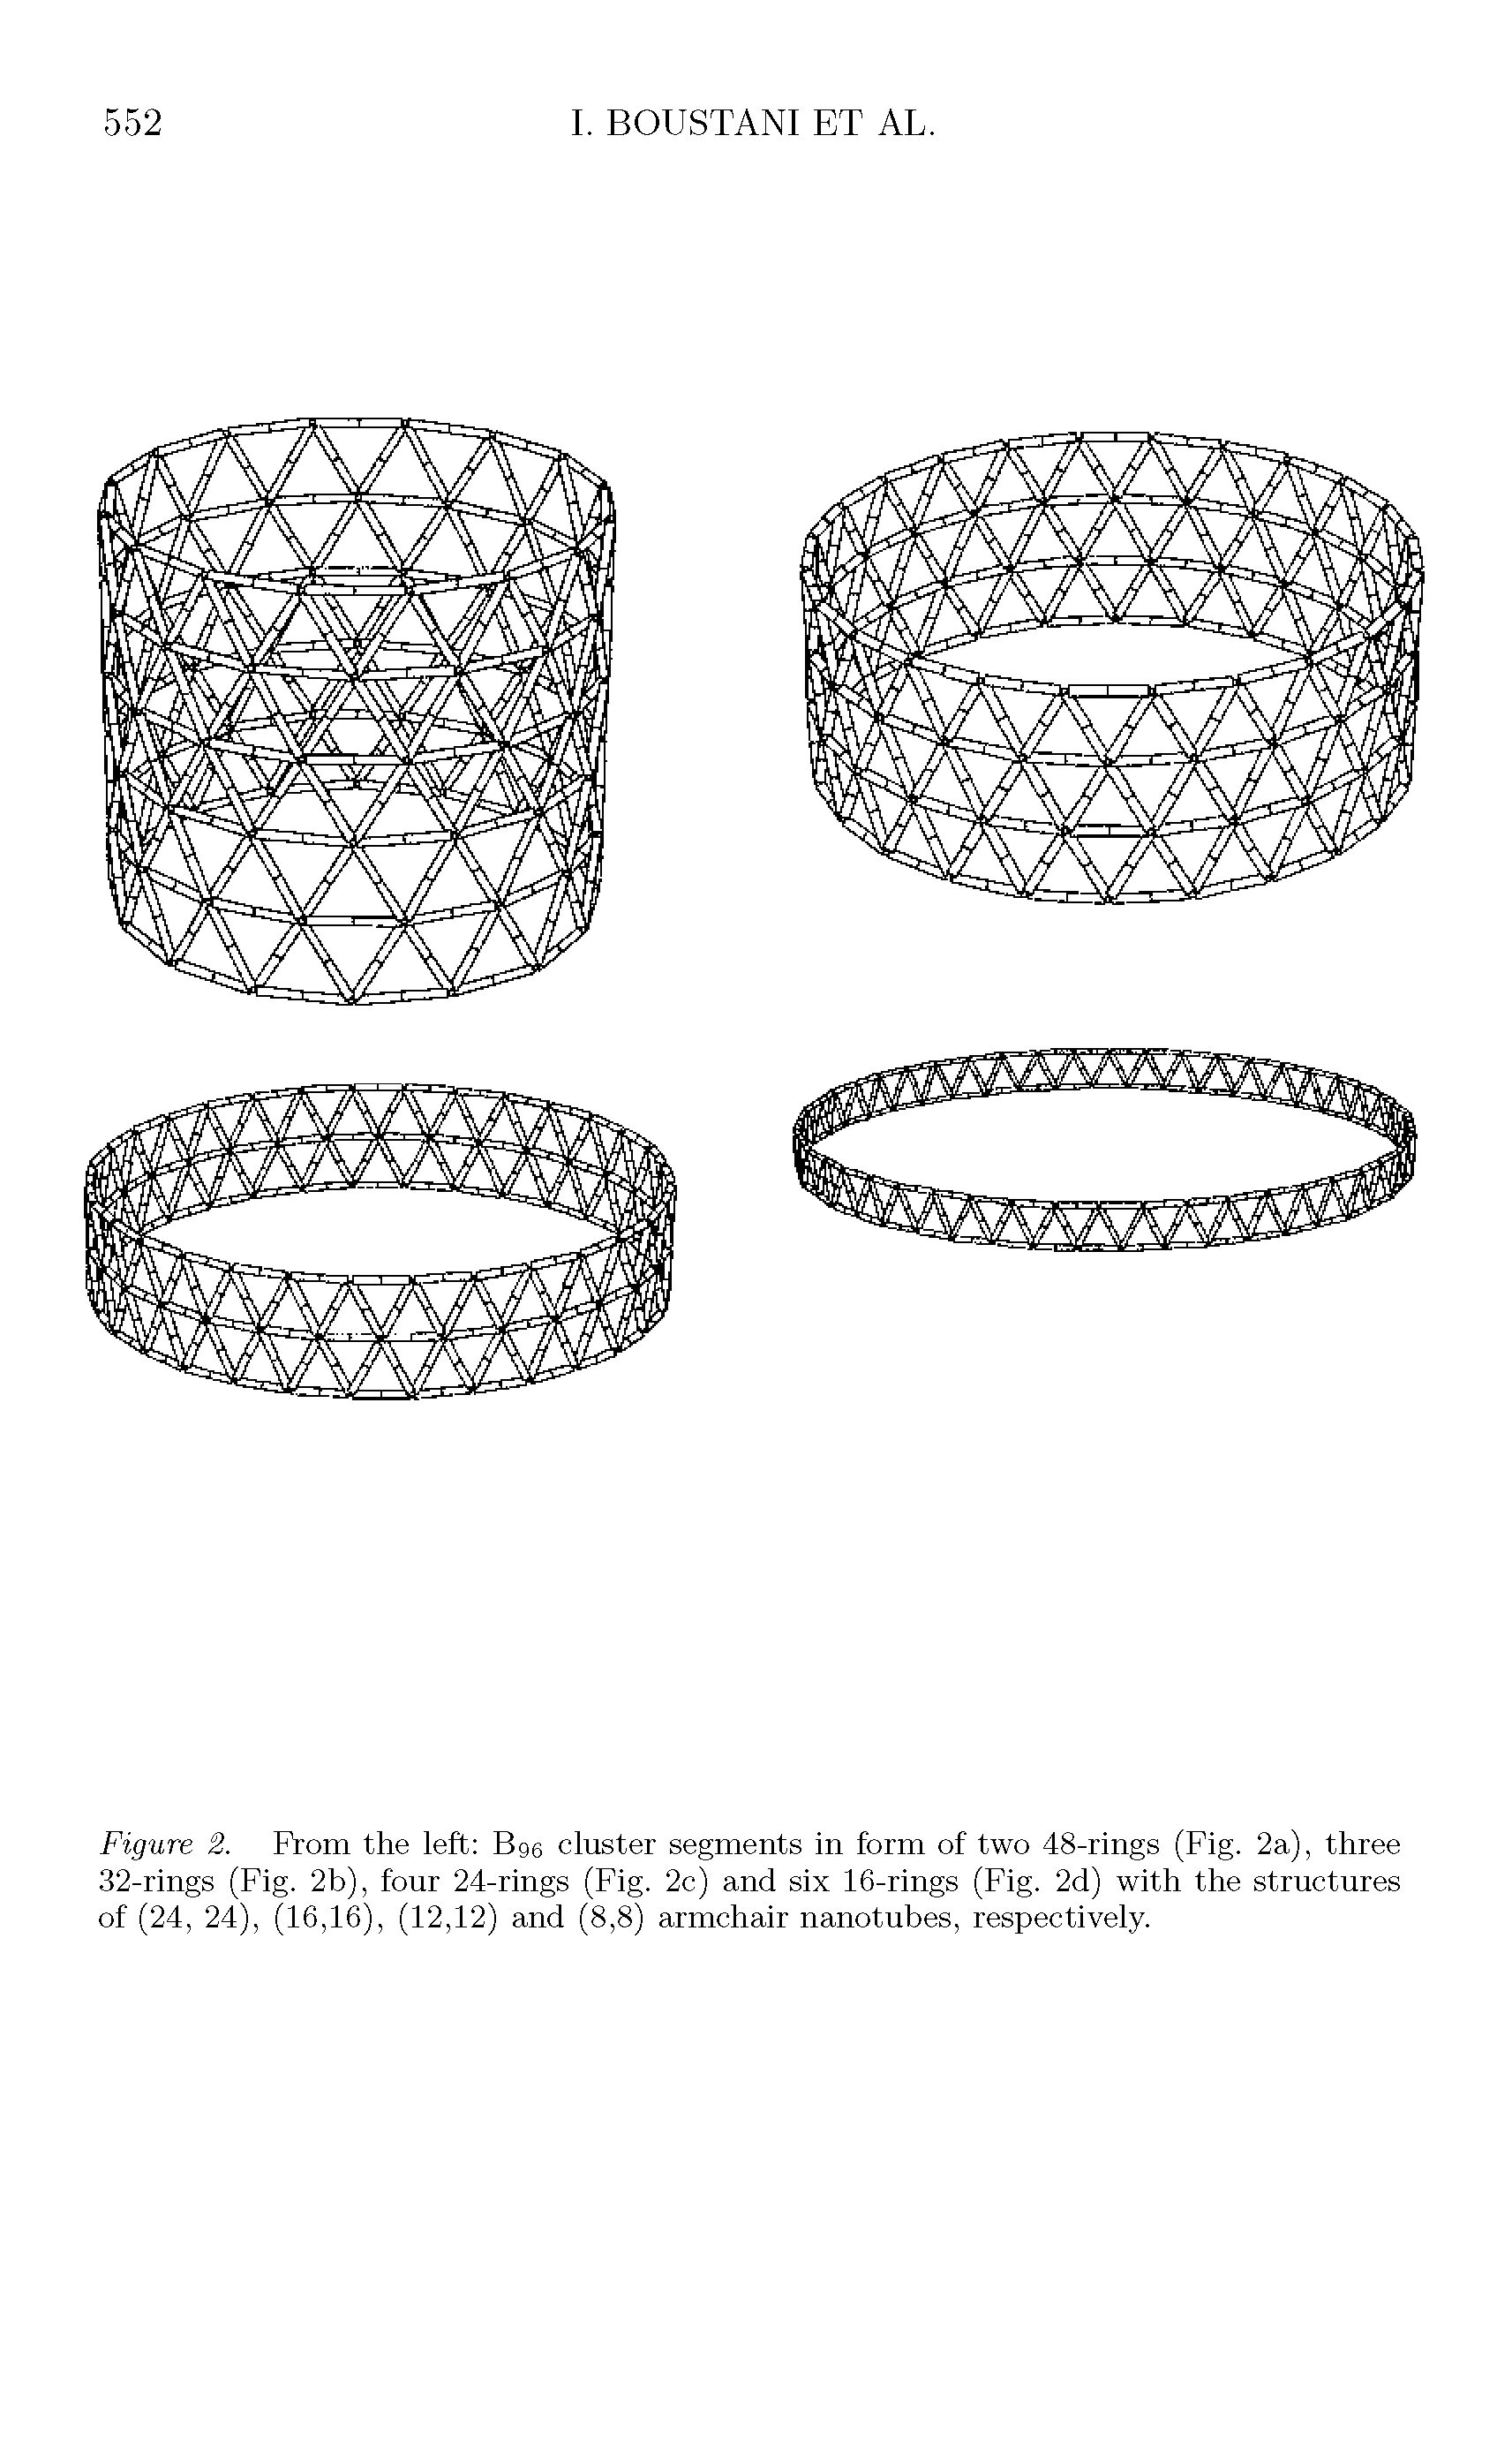 Figure 2. From the left Bge cluster segments in form of two 48-rings (Fig. 2a), three 32-rings (Fig. 2b), four 24-rings (Fig. 2c) and six 16-rings (Fig. 2d) with the structures of (24, 24), (16,16), (12,12) and (8,8) armchair nanotubes, respectively.